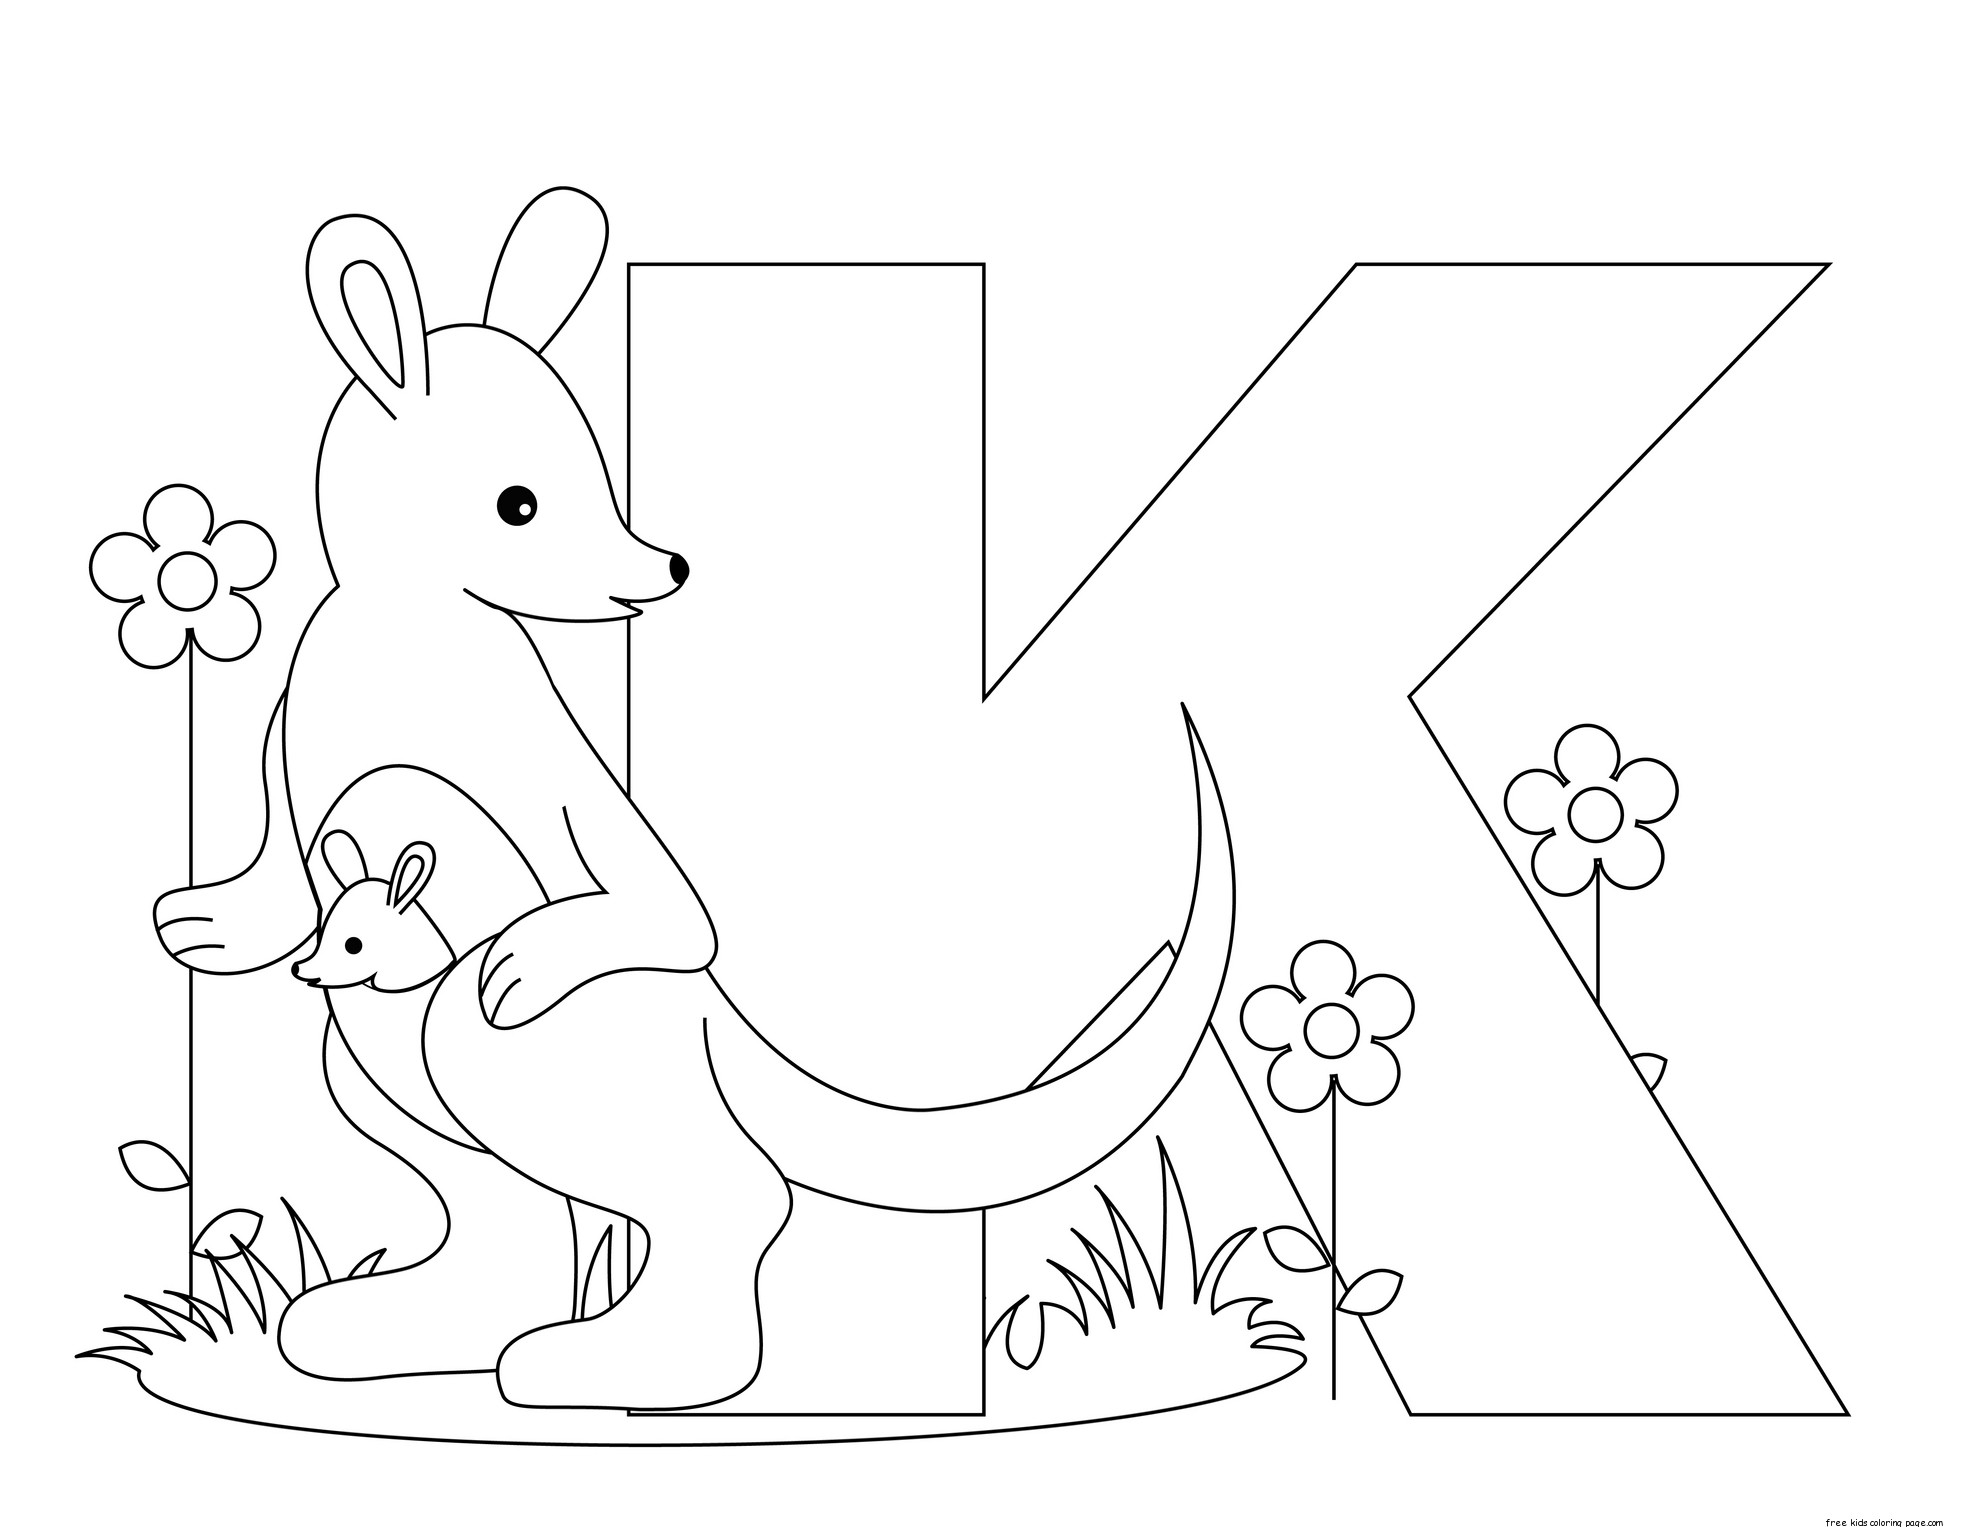 k for kangaroo coloring pages - photo #26